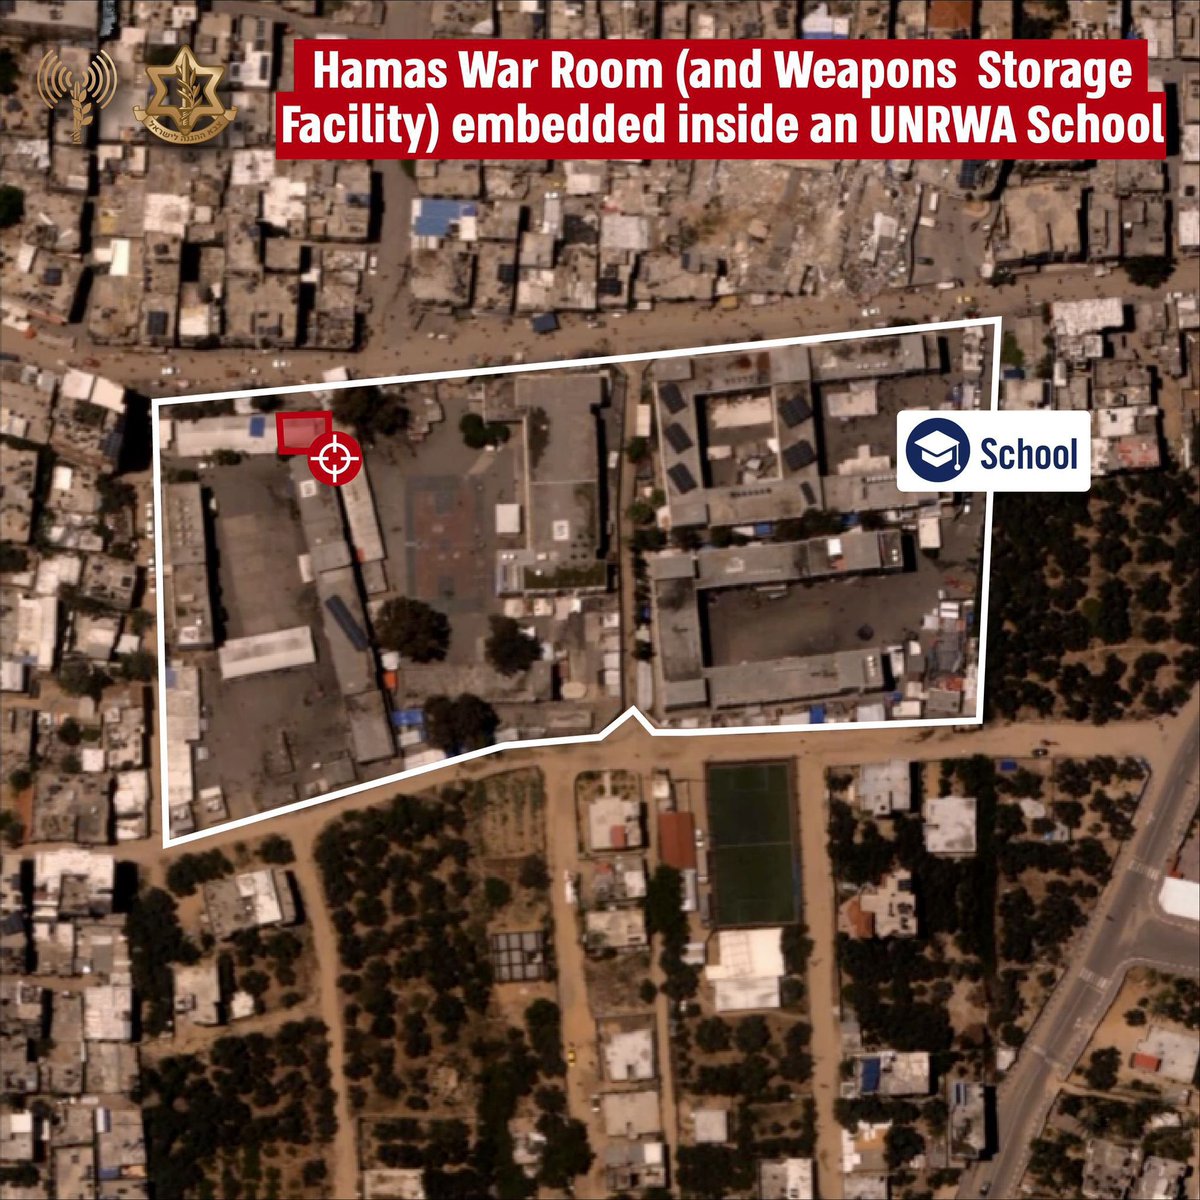 The IDF has carried out a precise strike on a Hamas war room embedded inside an @UNRWA school in the area of Nuseirat, Gaza. The war room was used by terrorist operatives in Hamas' military wing. The strike was carried out using precise munitions in order to minimize harm to…